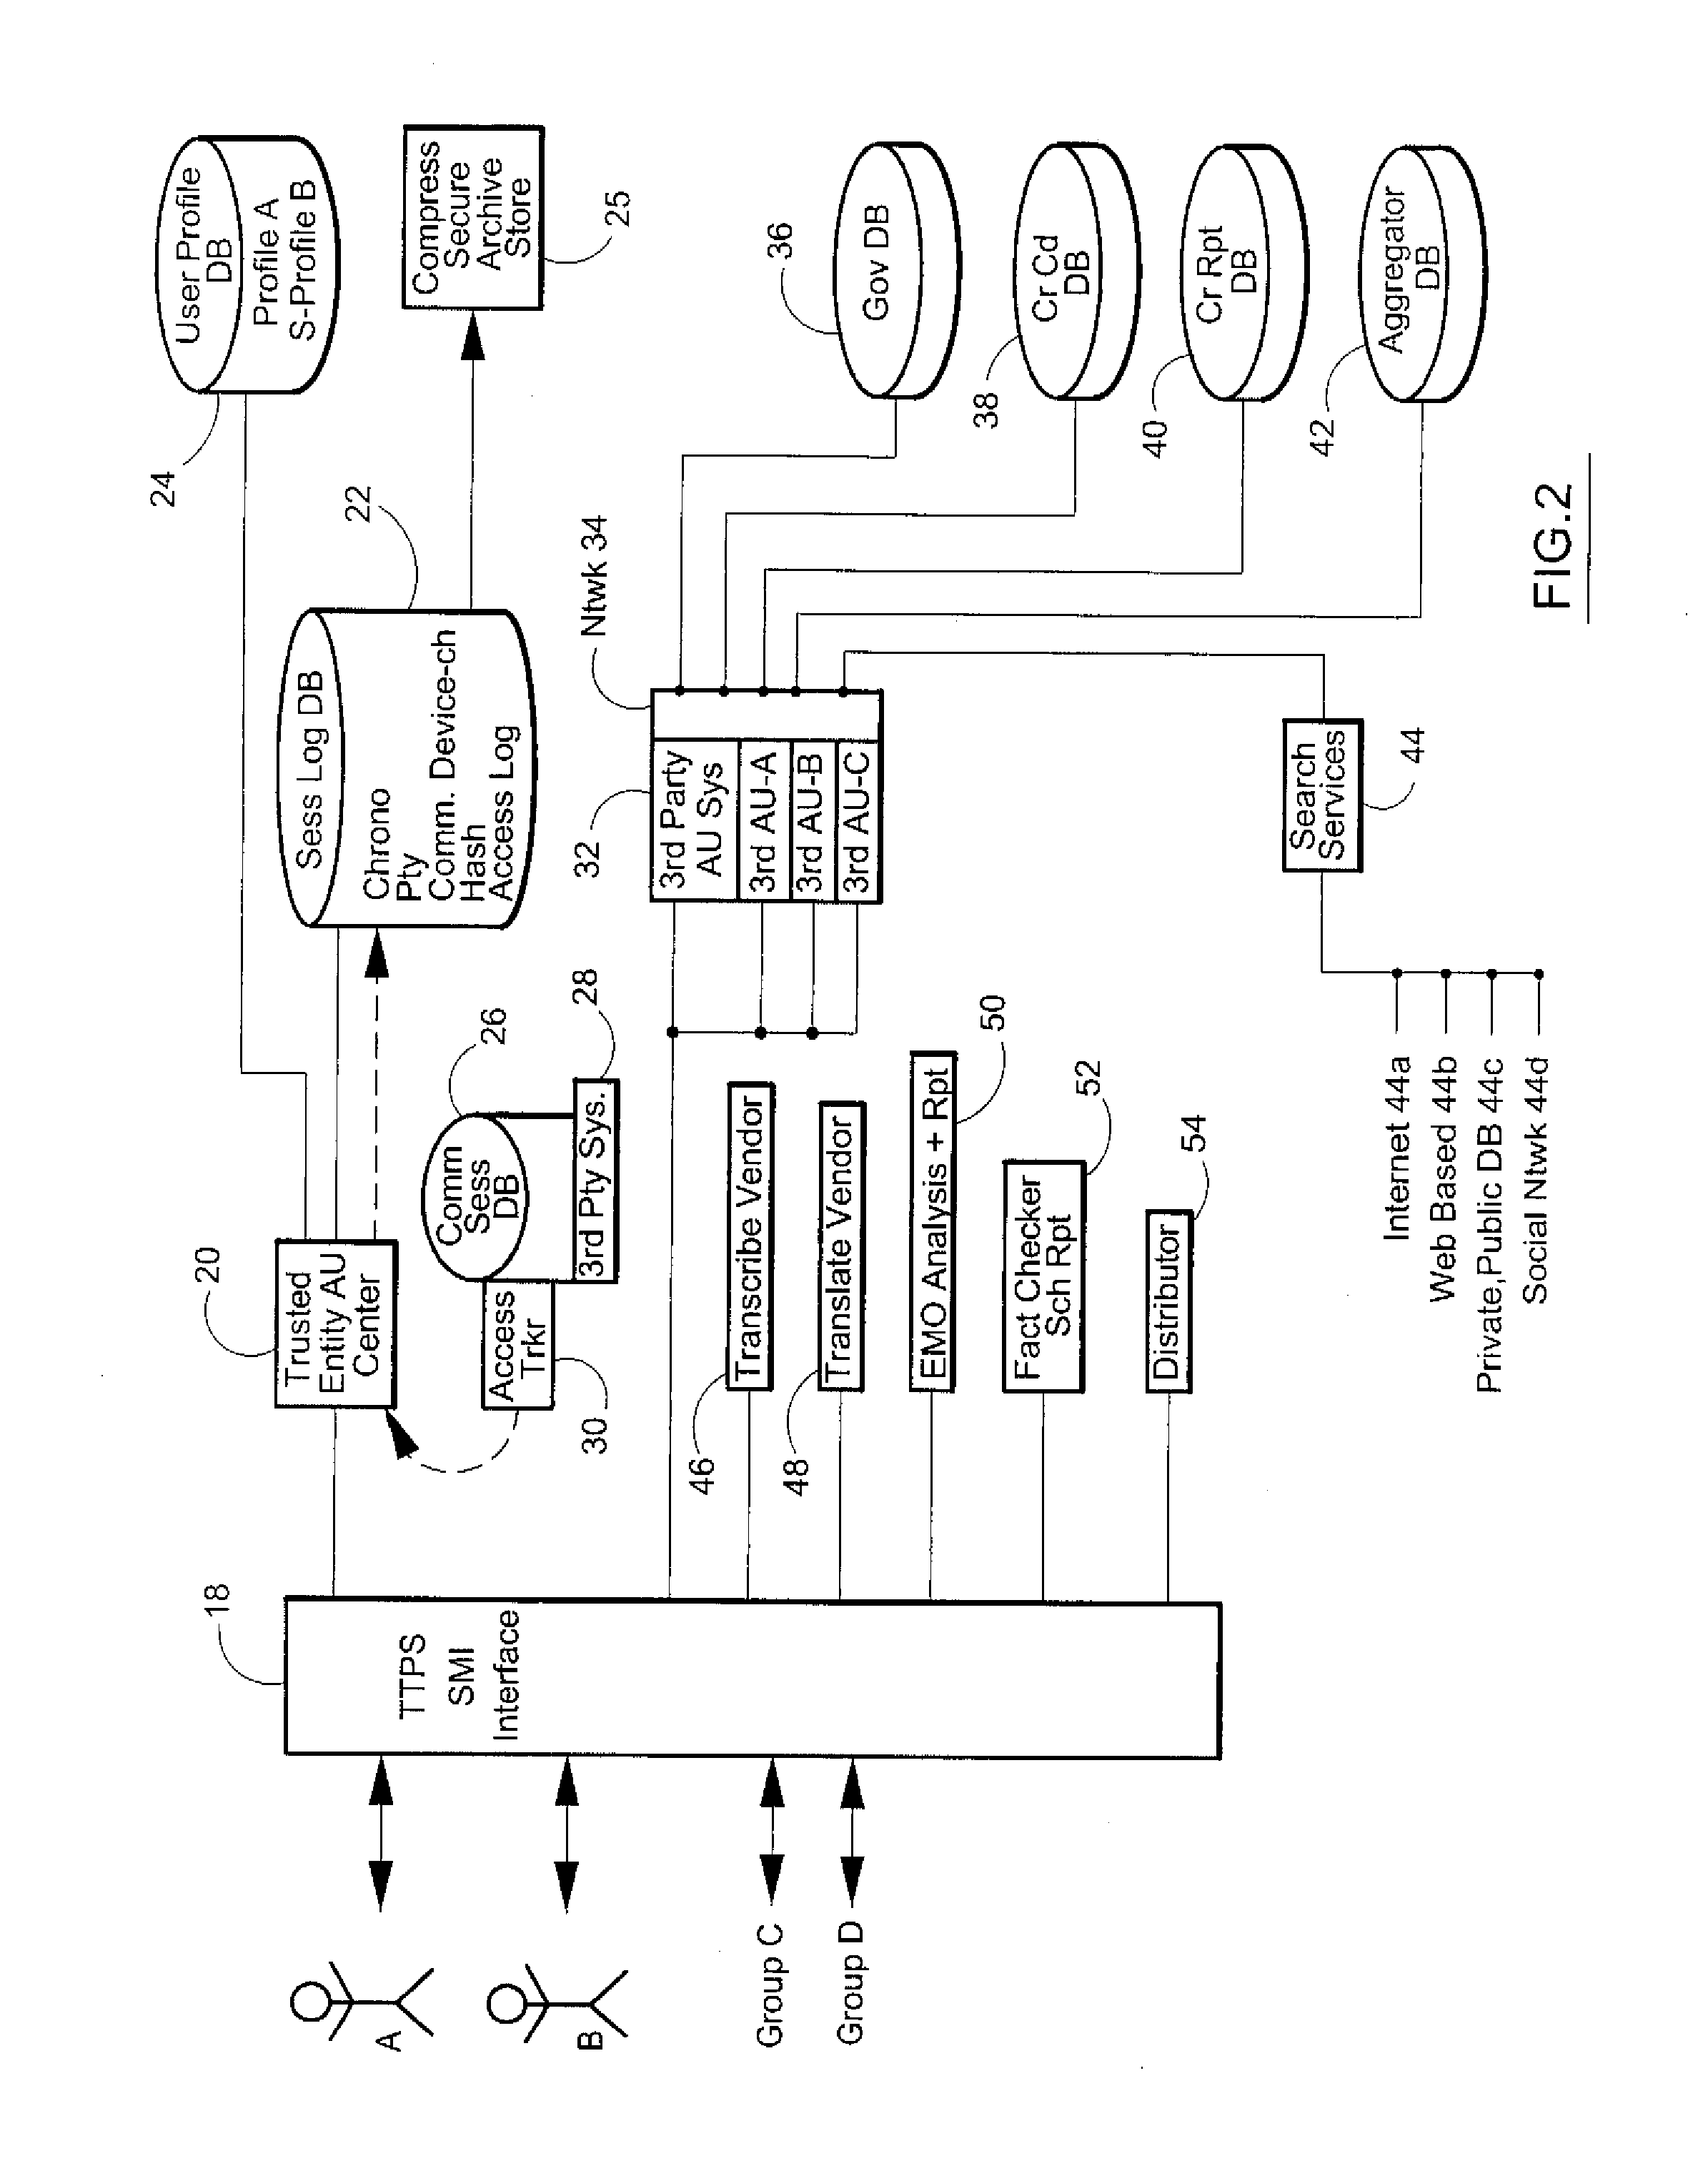 Certified Communications System and Method